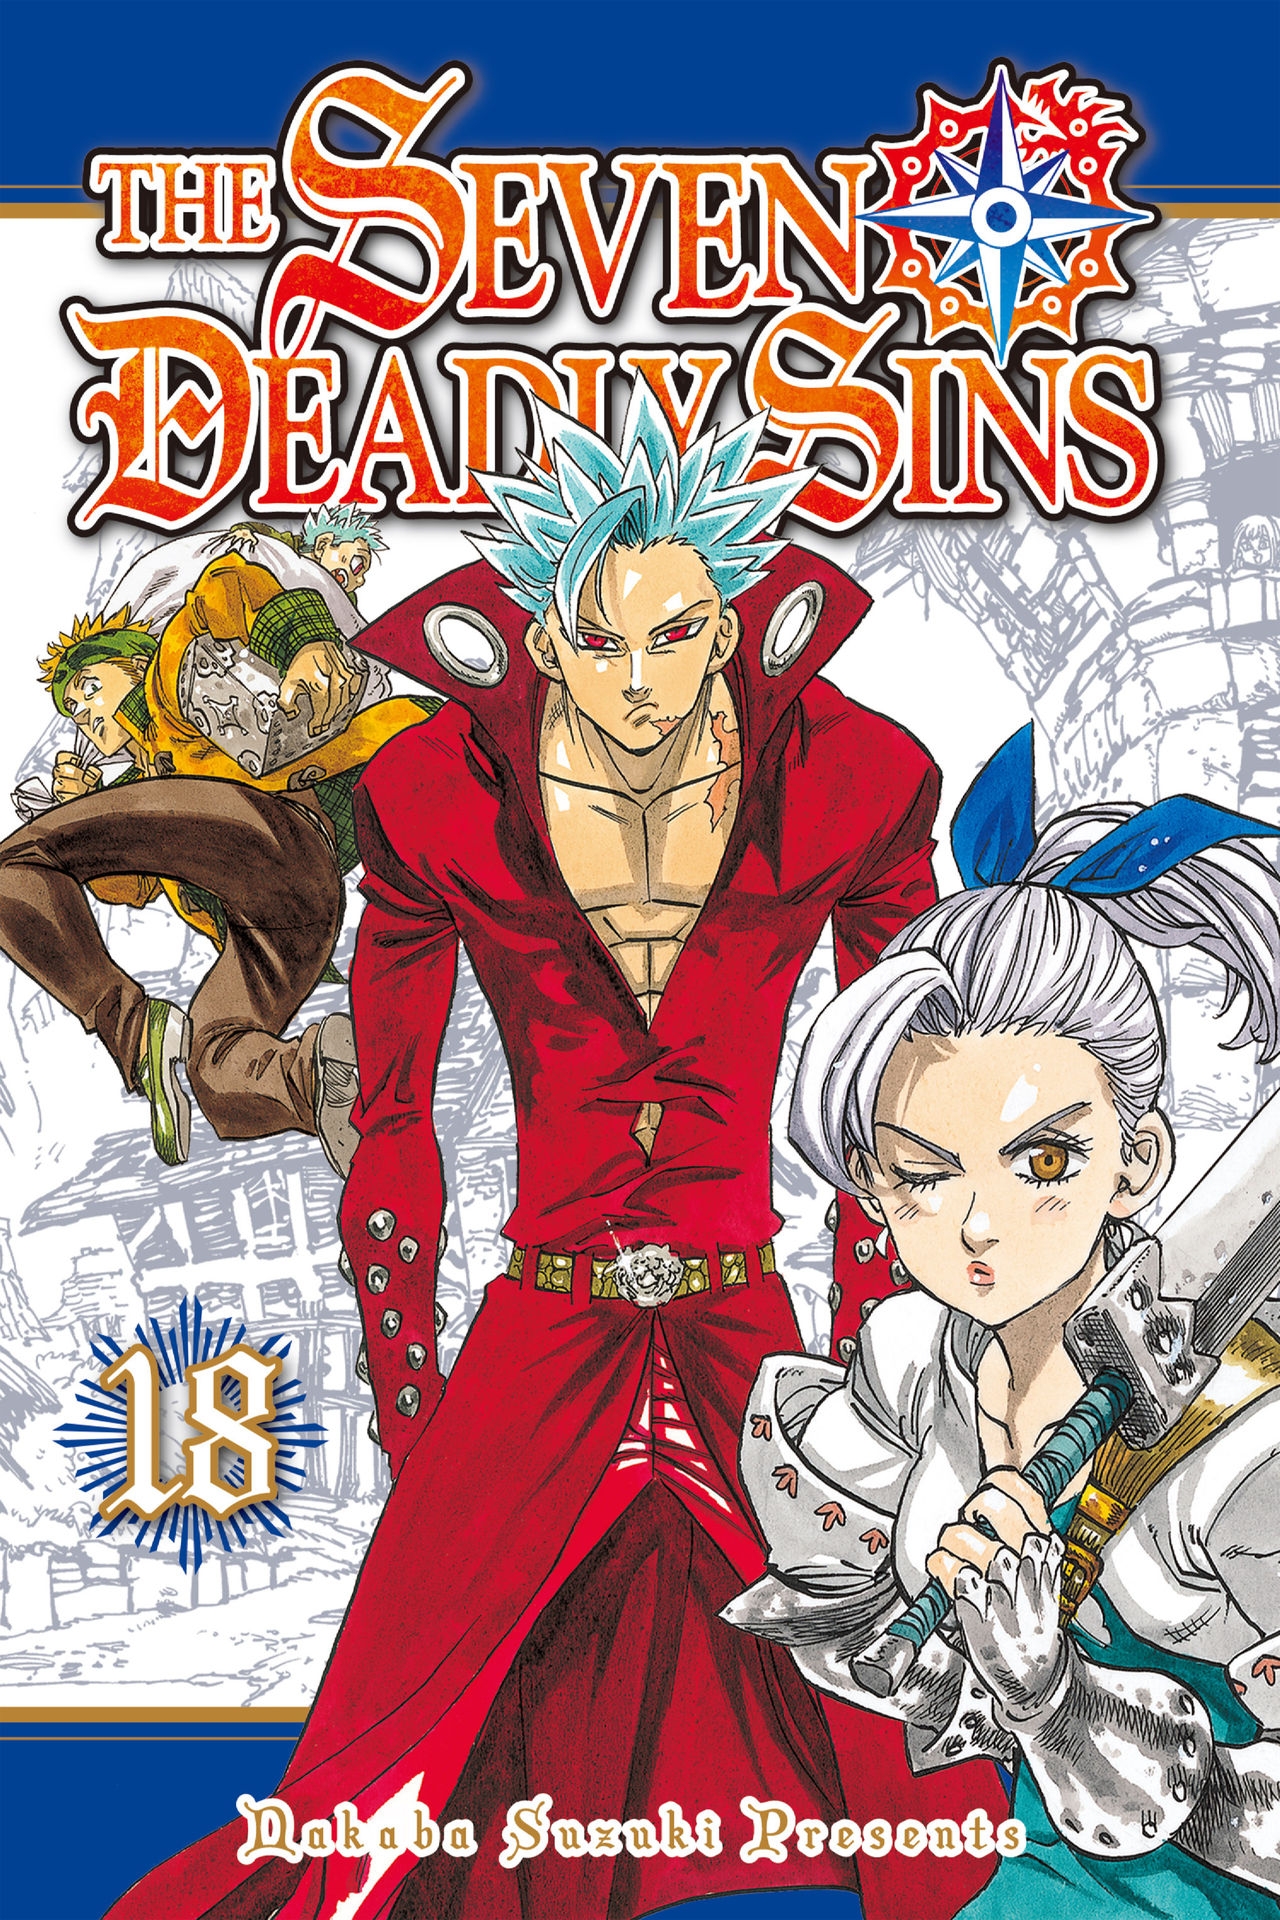 The Seven Deadly Sins (Covers & Chapter Title Cards) 336